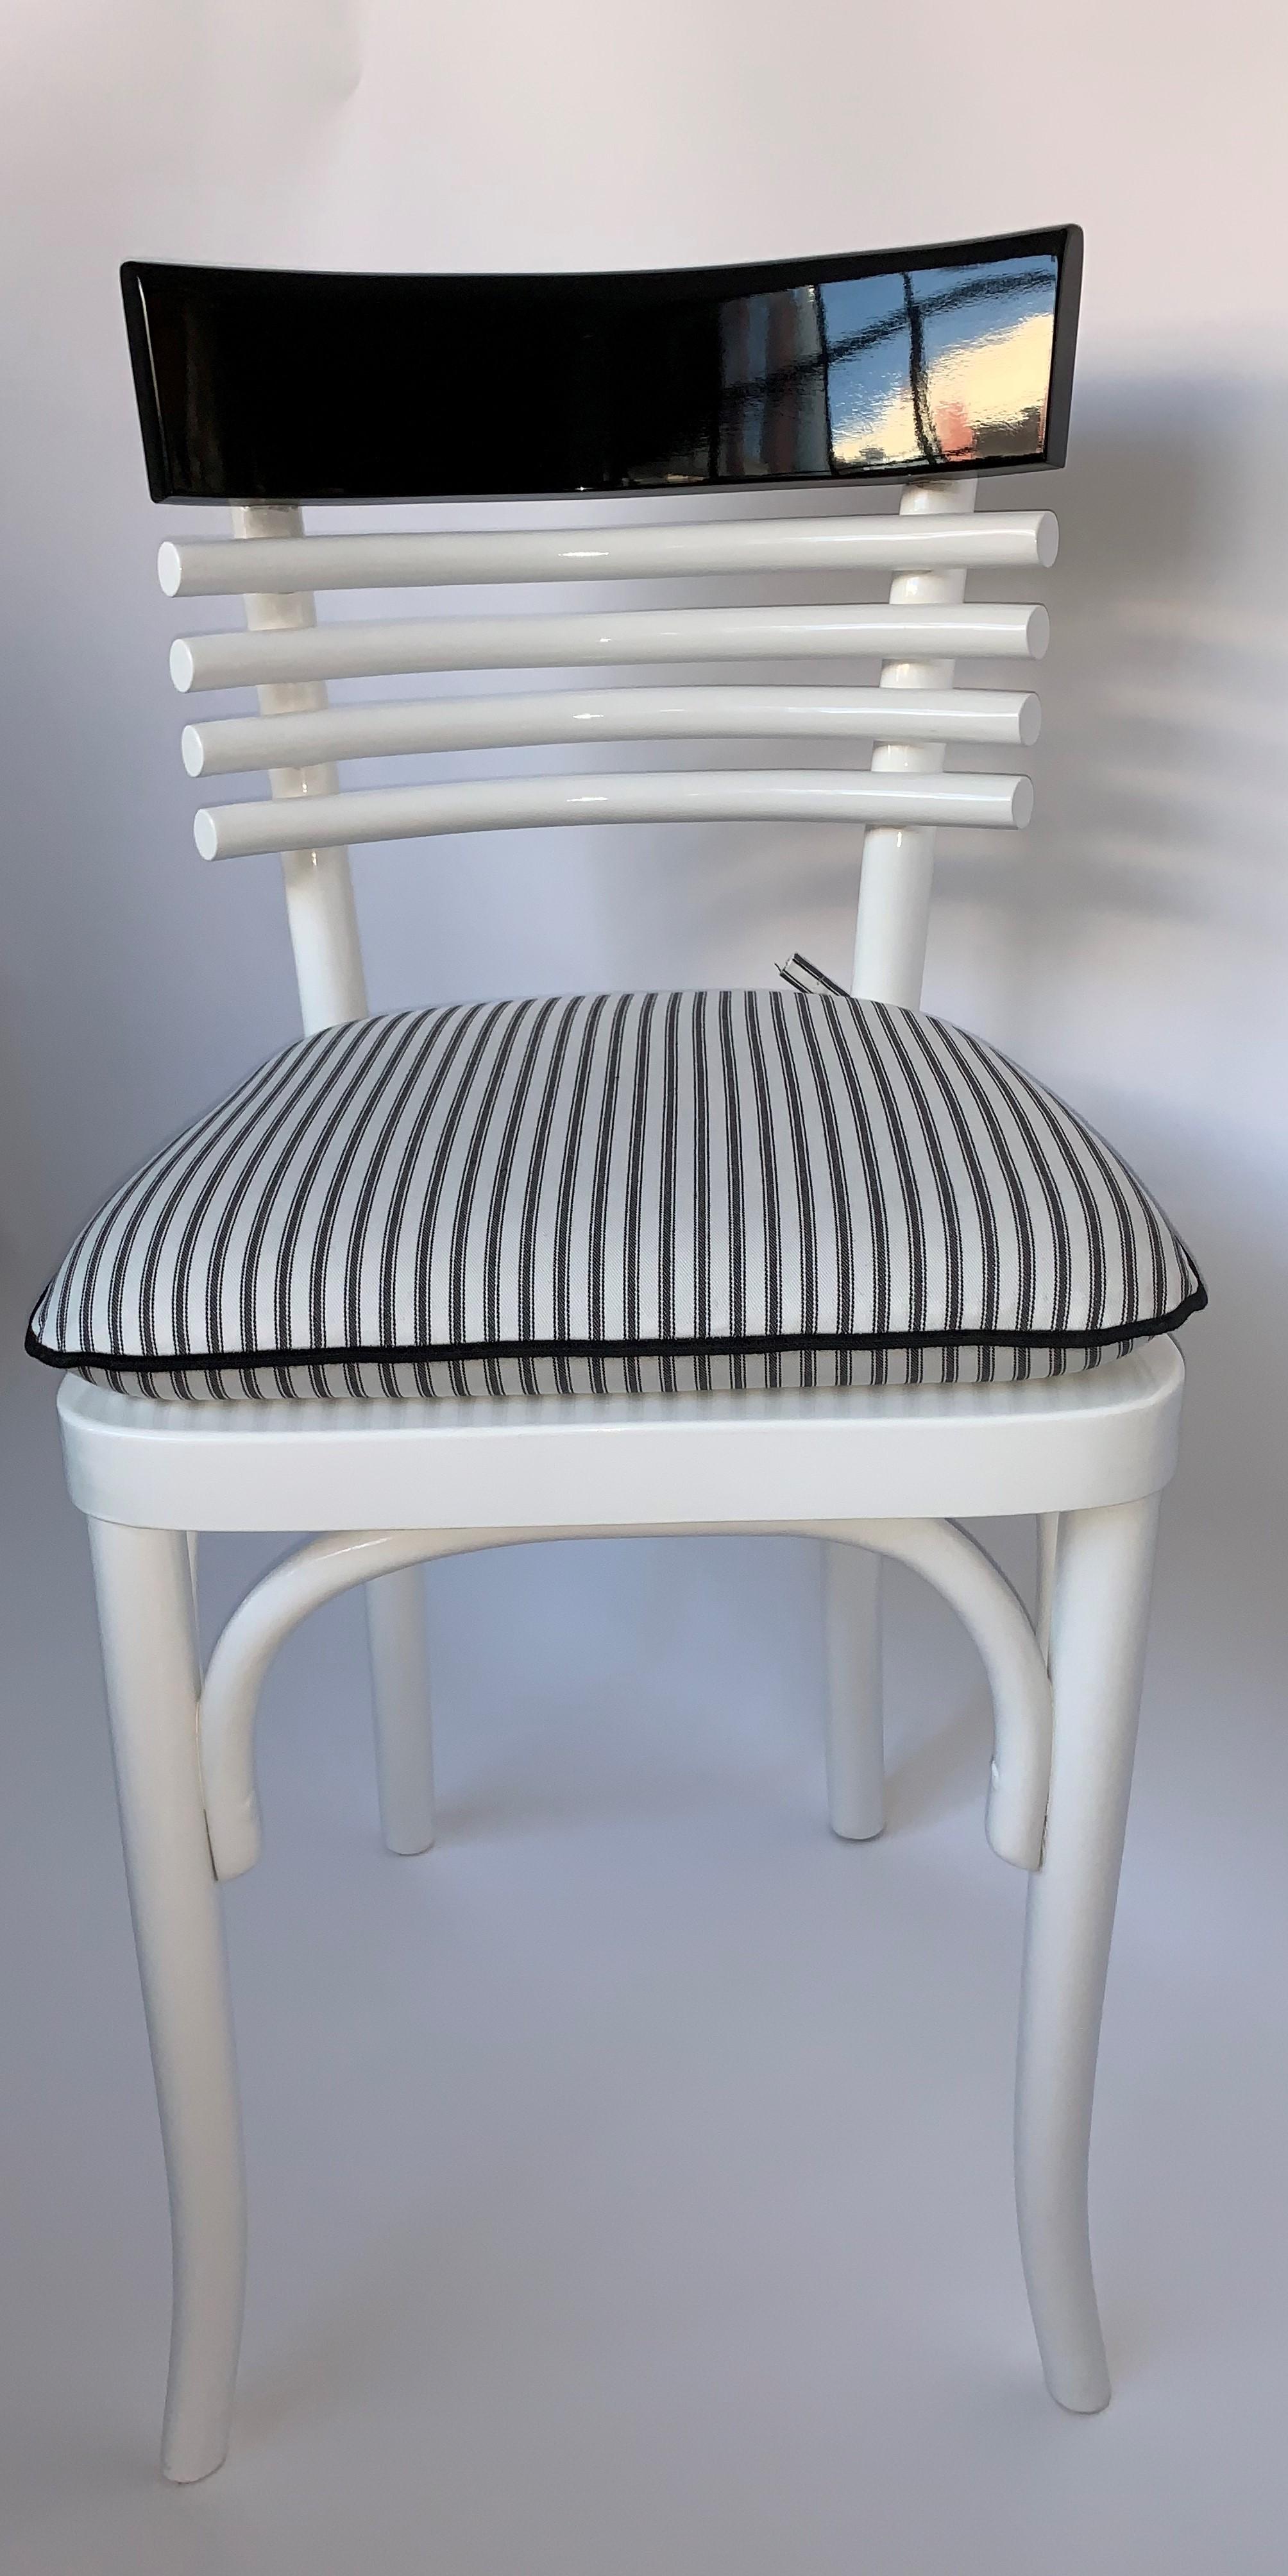 6 Vintage French Cafe chairs. Each chair has been impeccably refinished with a black and white lacquer. The chairs come with a custom cushion made with a coordinating black and white ticking stripe fabric.

Property from esteemed interior designer